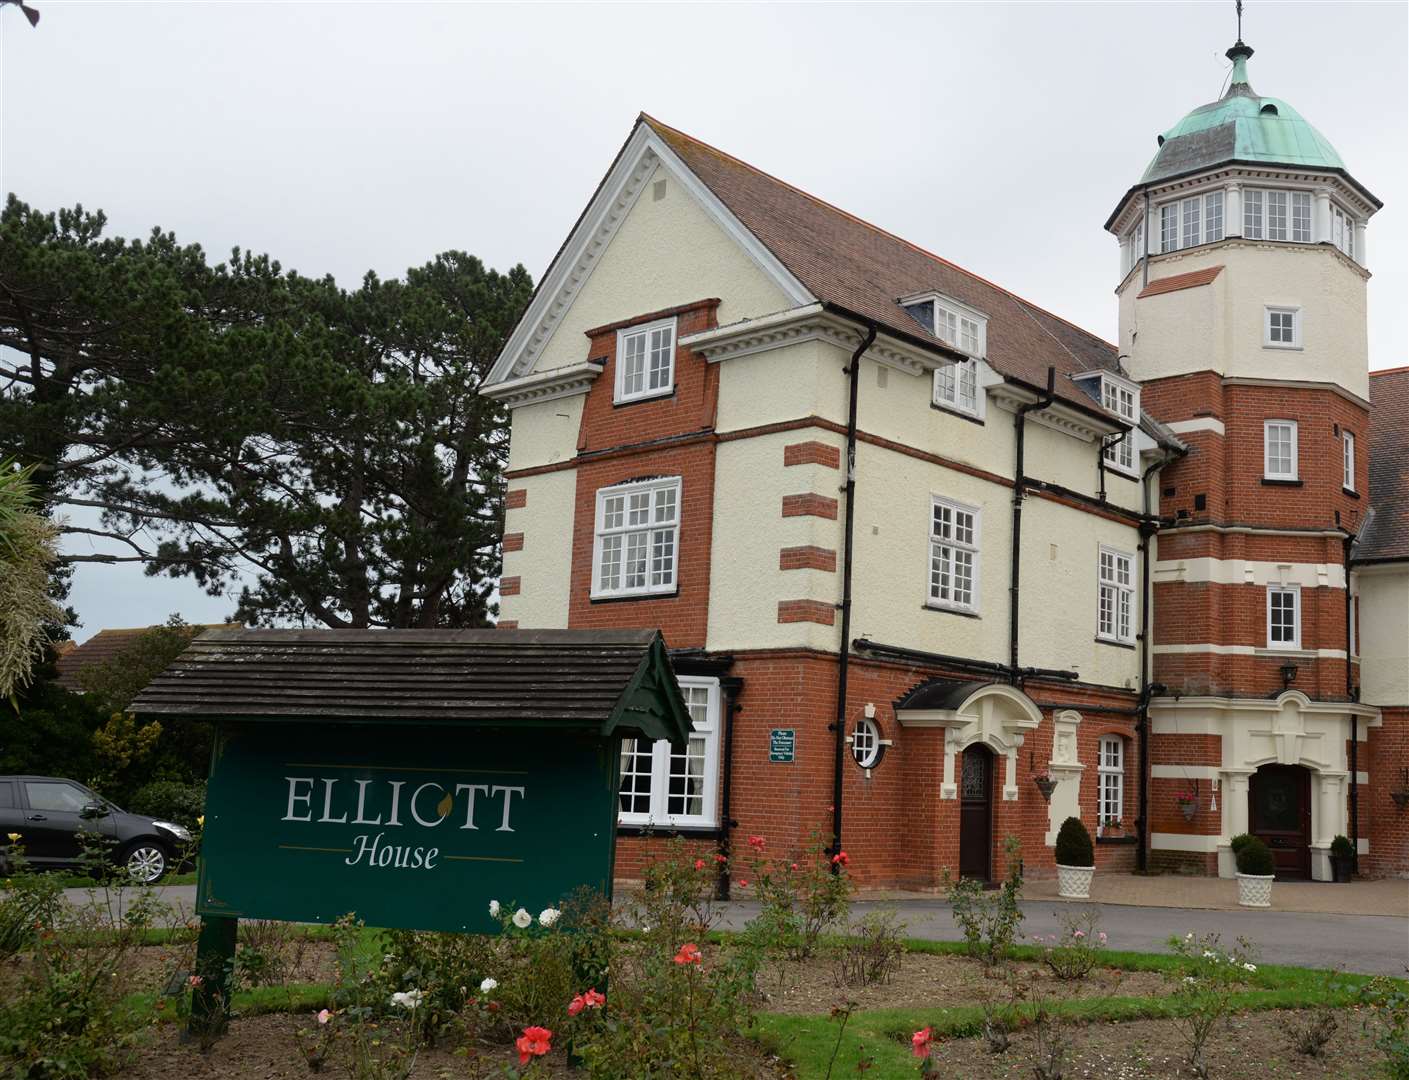 Elliott House care home in Herne Bay has been put on the market just a few months after its shock closure